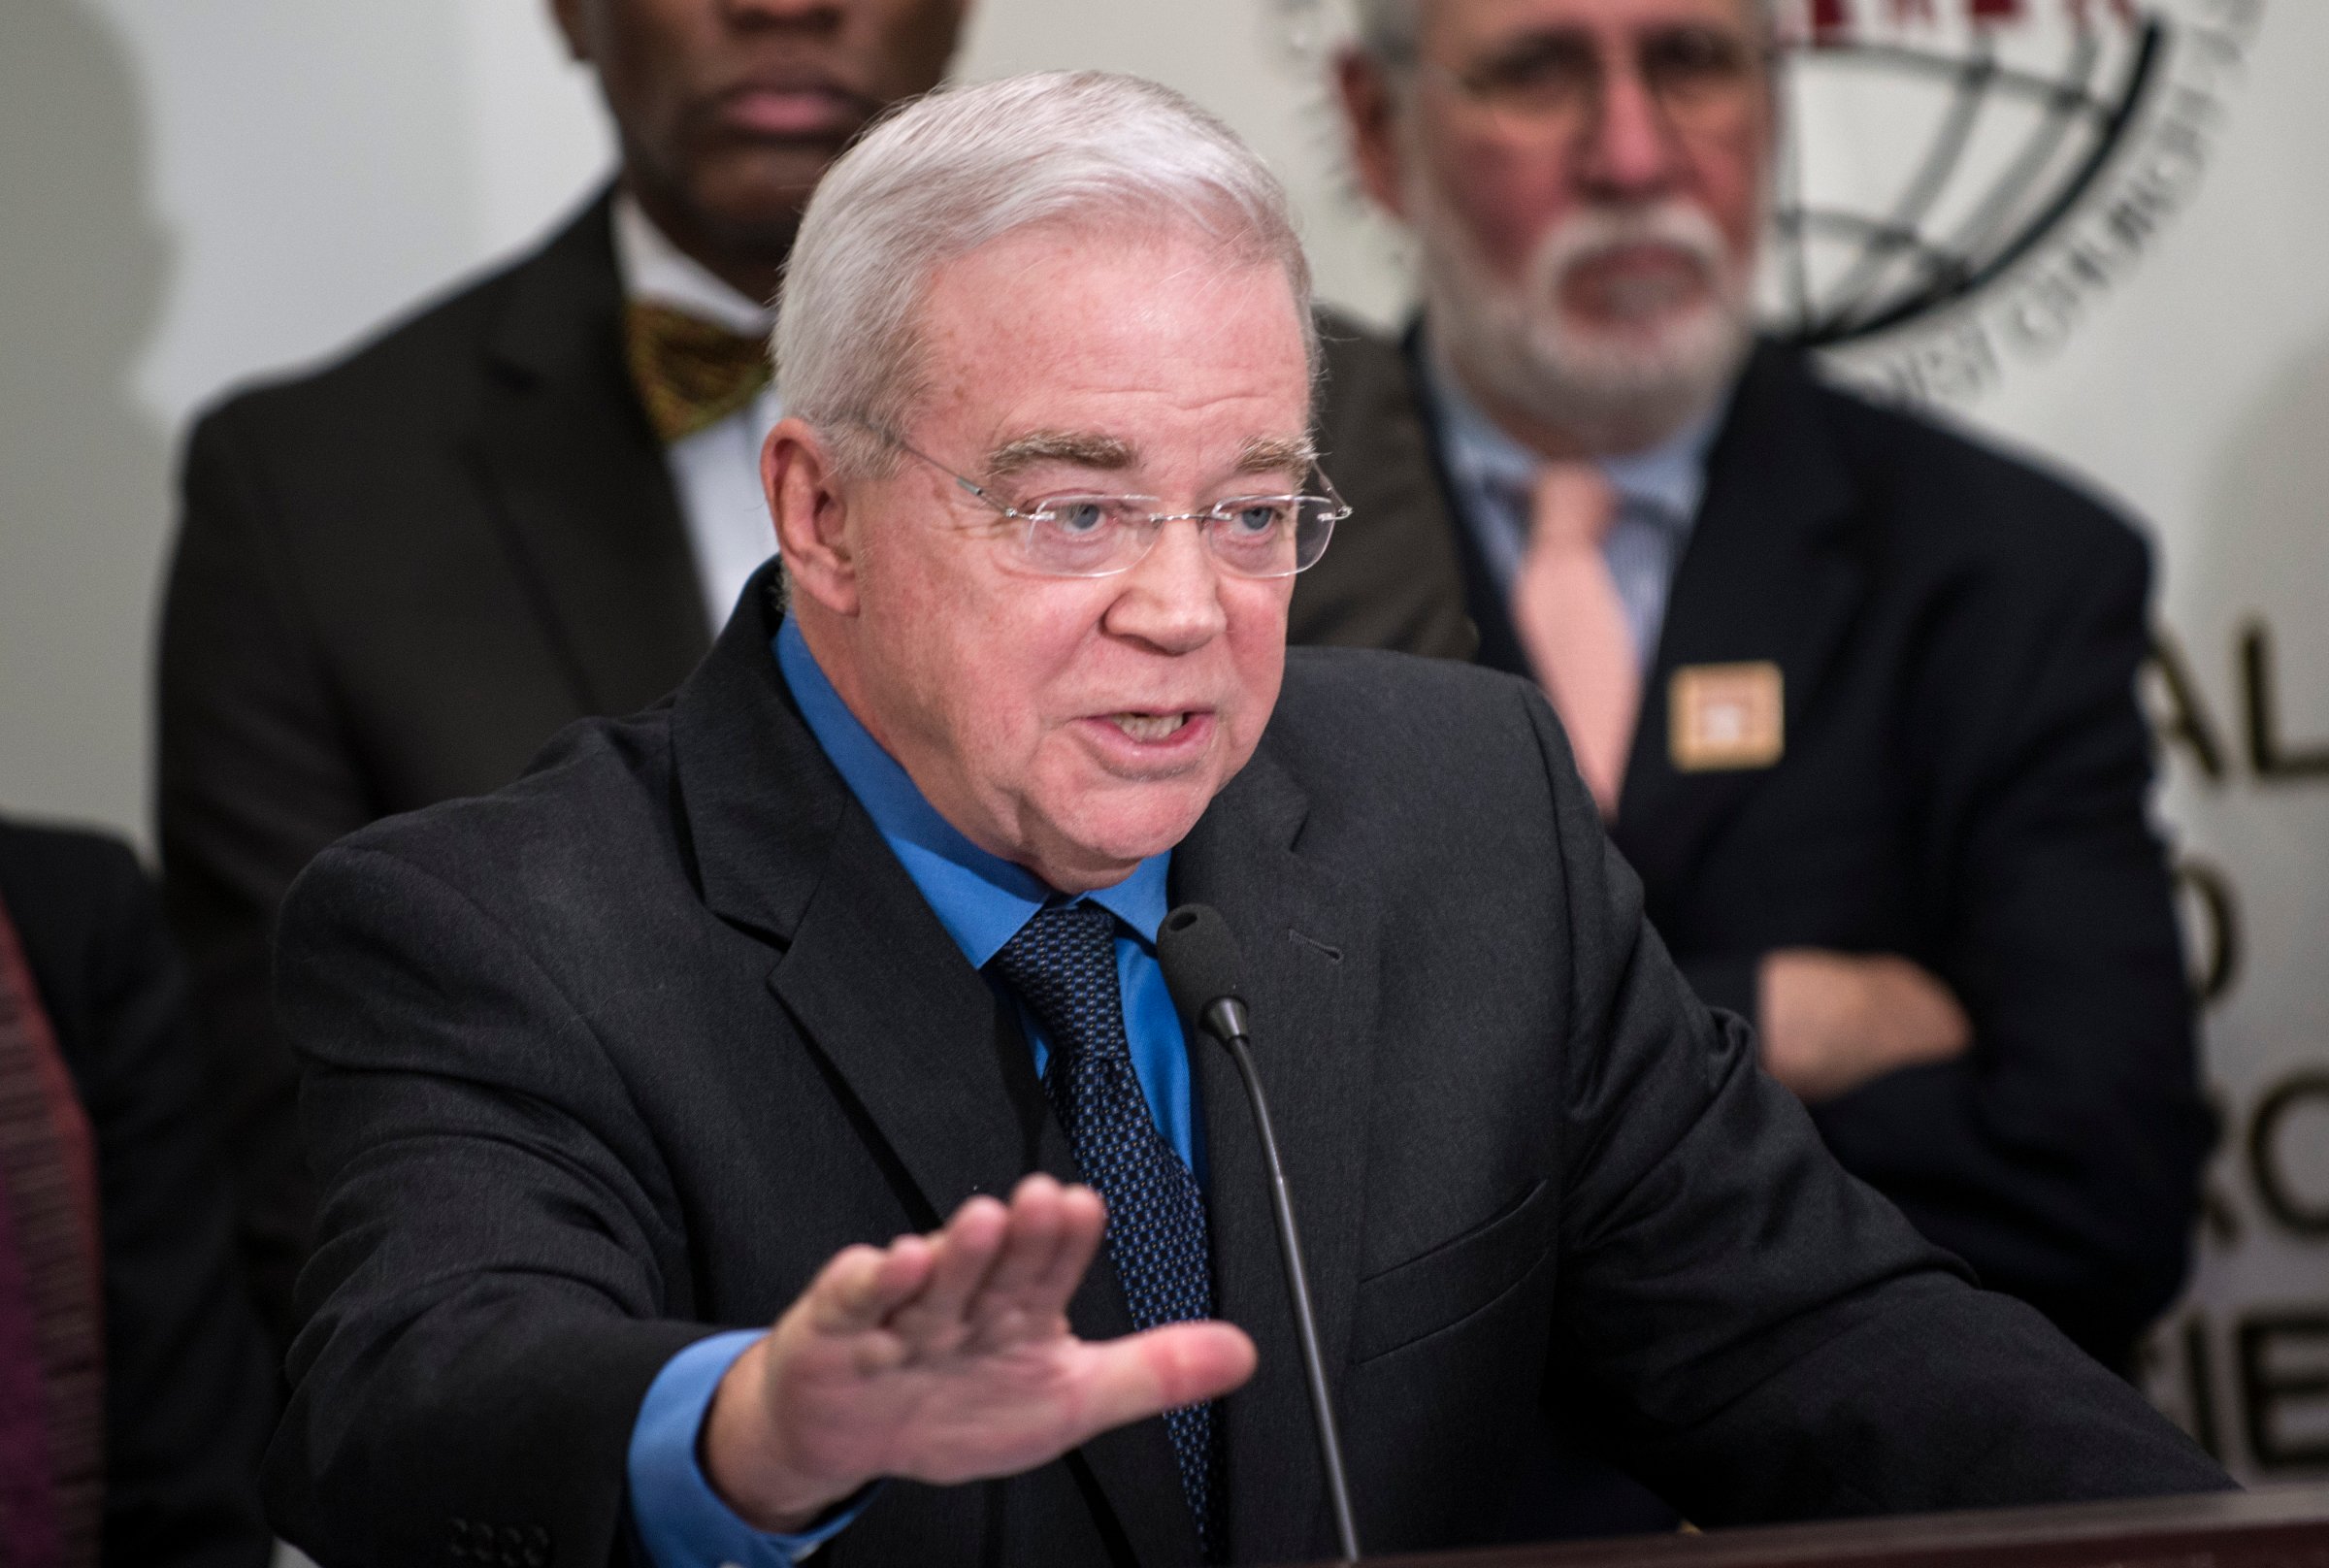 Jim Wallis, president and CEO of Sojourners, speaks during a press conference at the United Methodist Building in Washington, D.C., on Jan. 15, 2013.